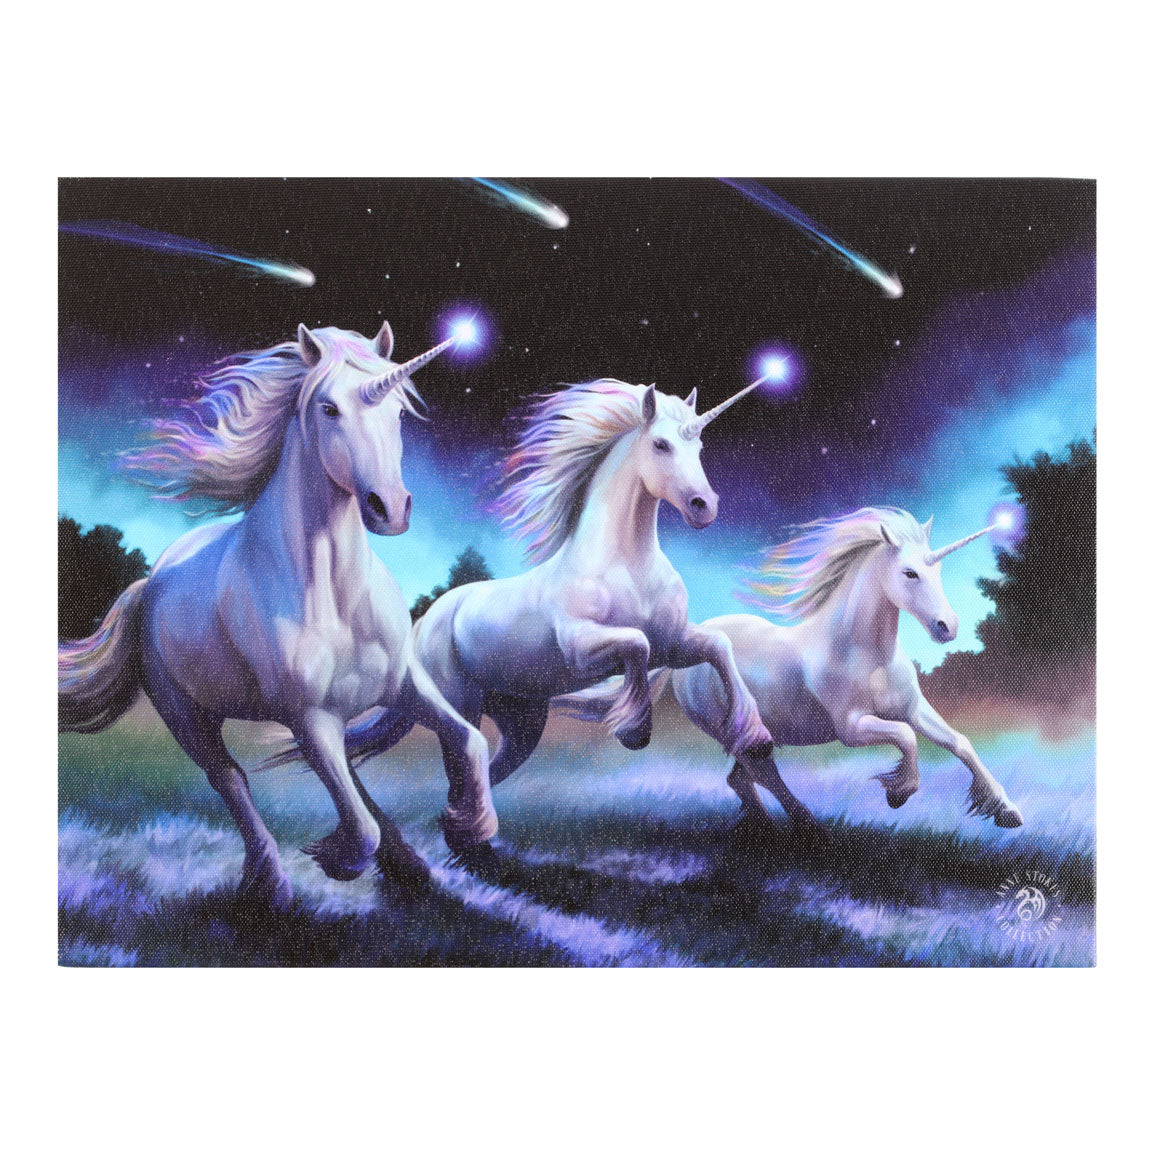 View 25x19cm Shooting Stars Canvas Plaque by Anne Stokes information